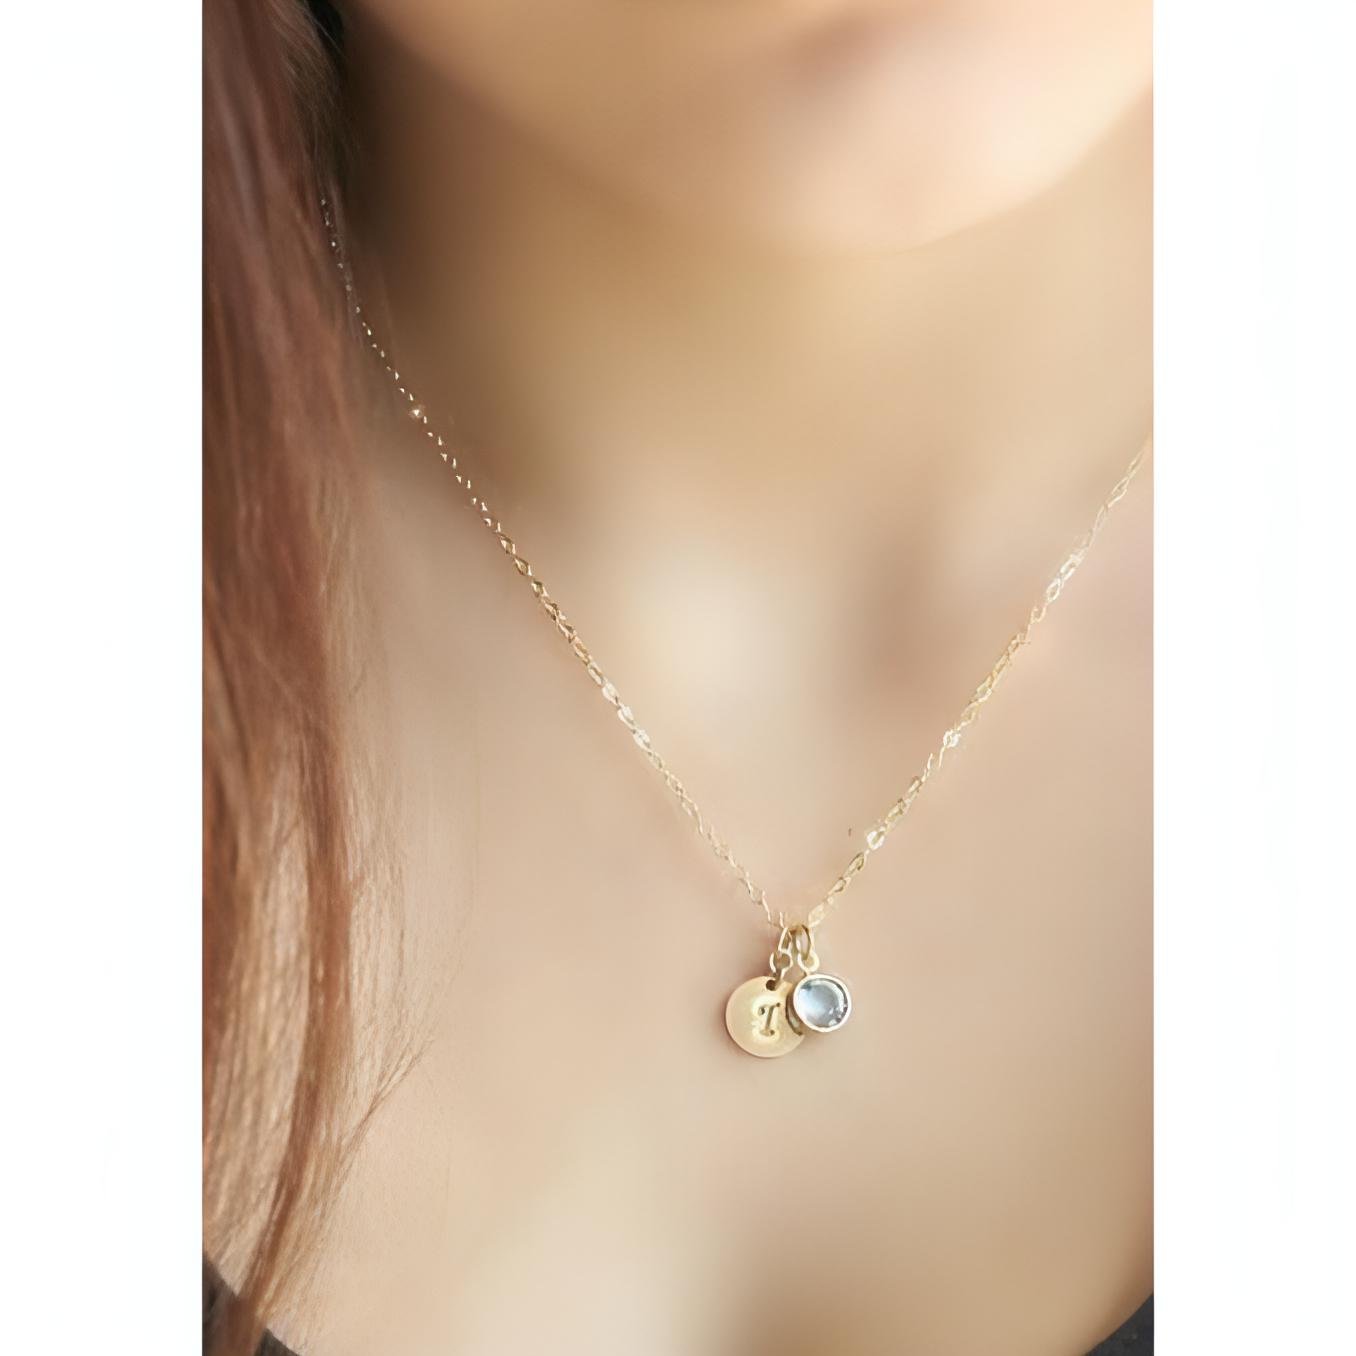 Initial S Necklace with Birthstone Charm Created with Zircondia® Crystals  by Philip Jones Jewellery